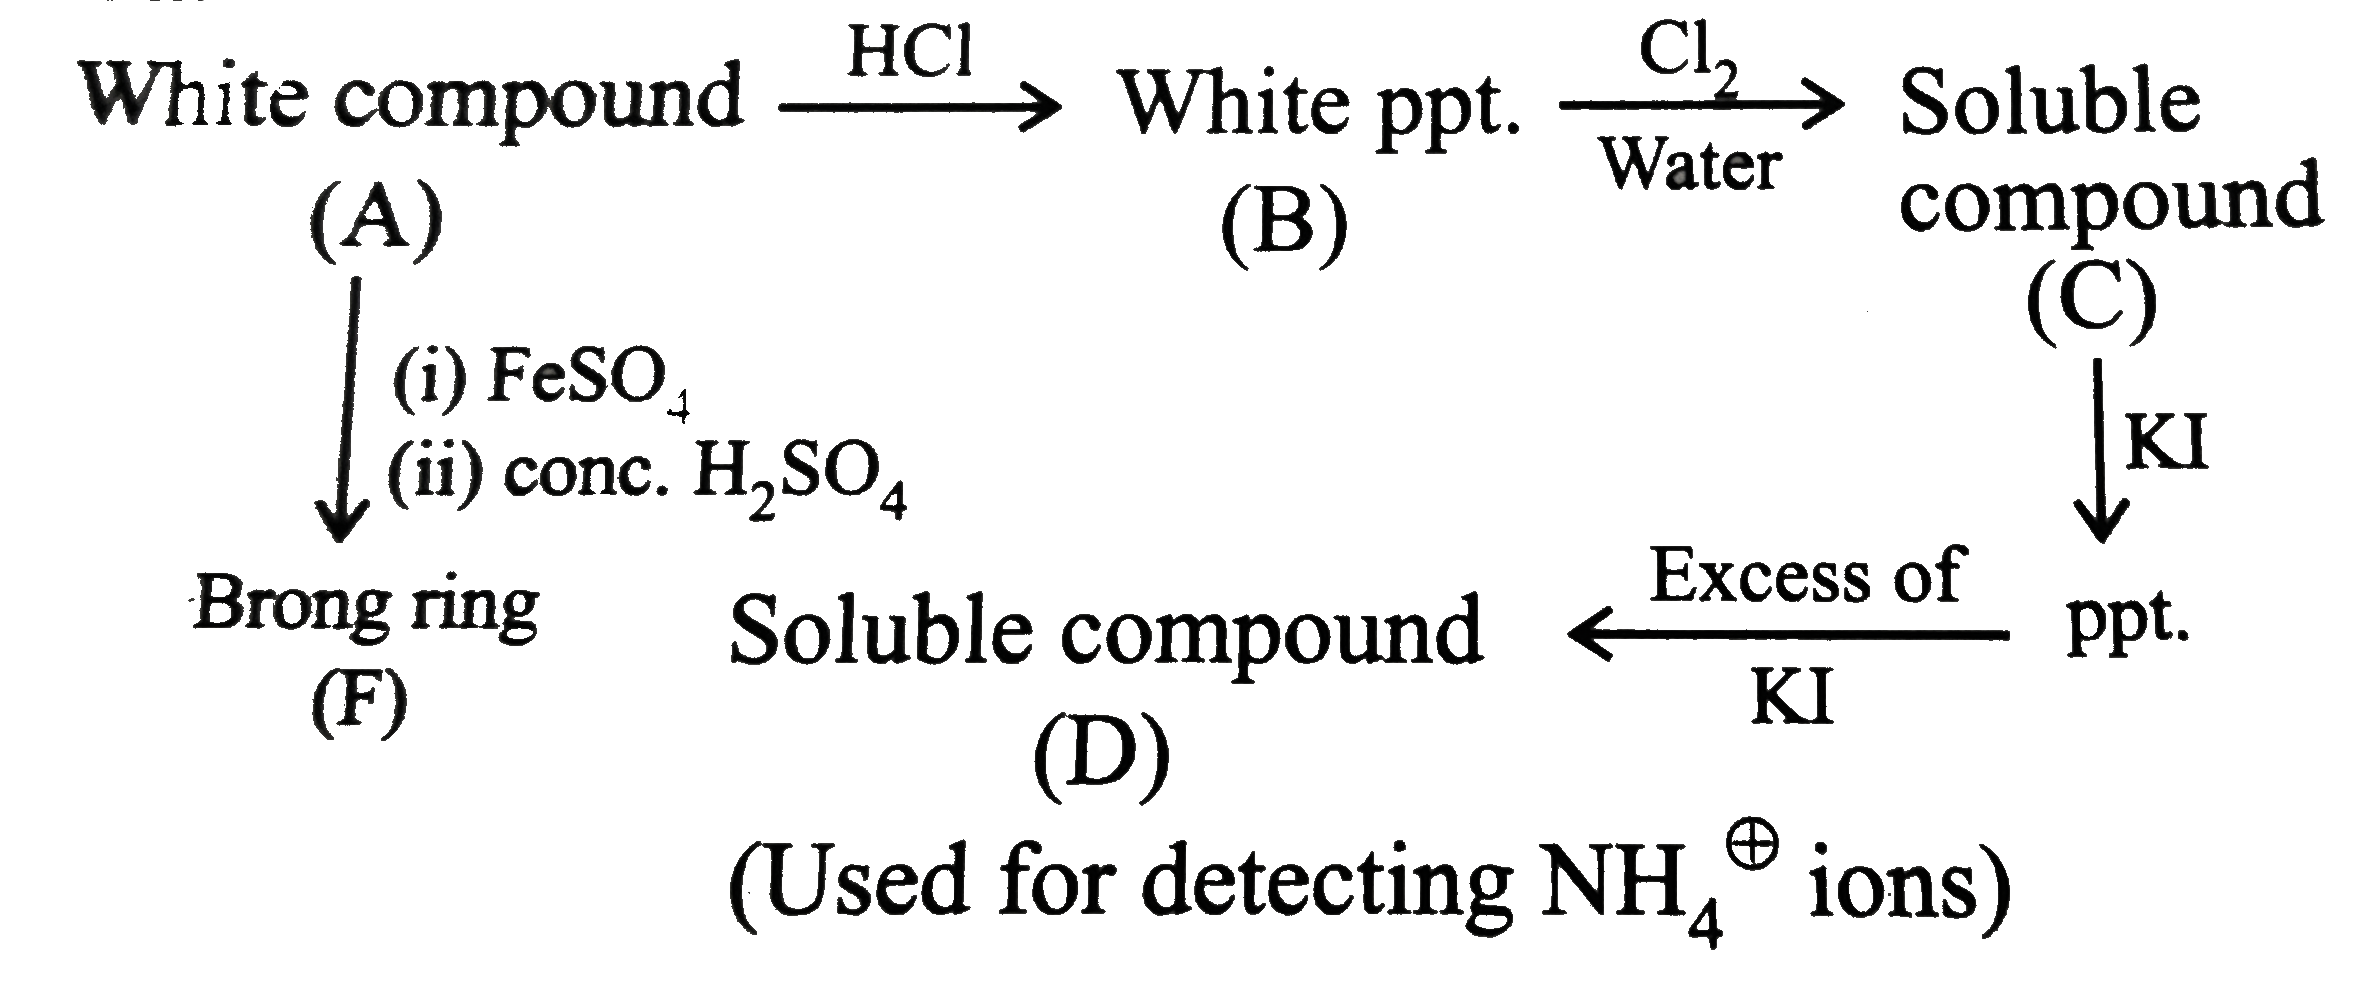 Oxidation  state of Fe in compound (F) is